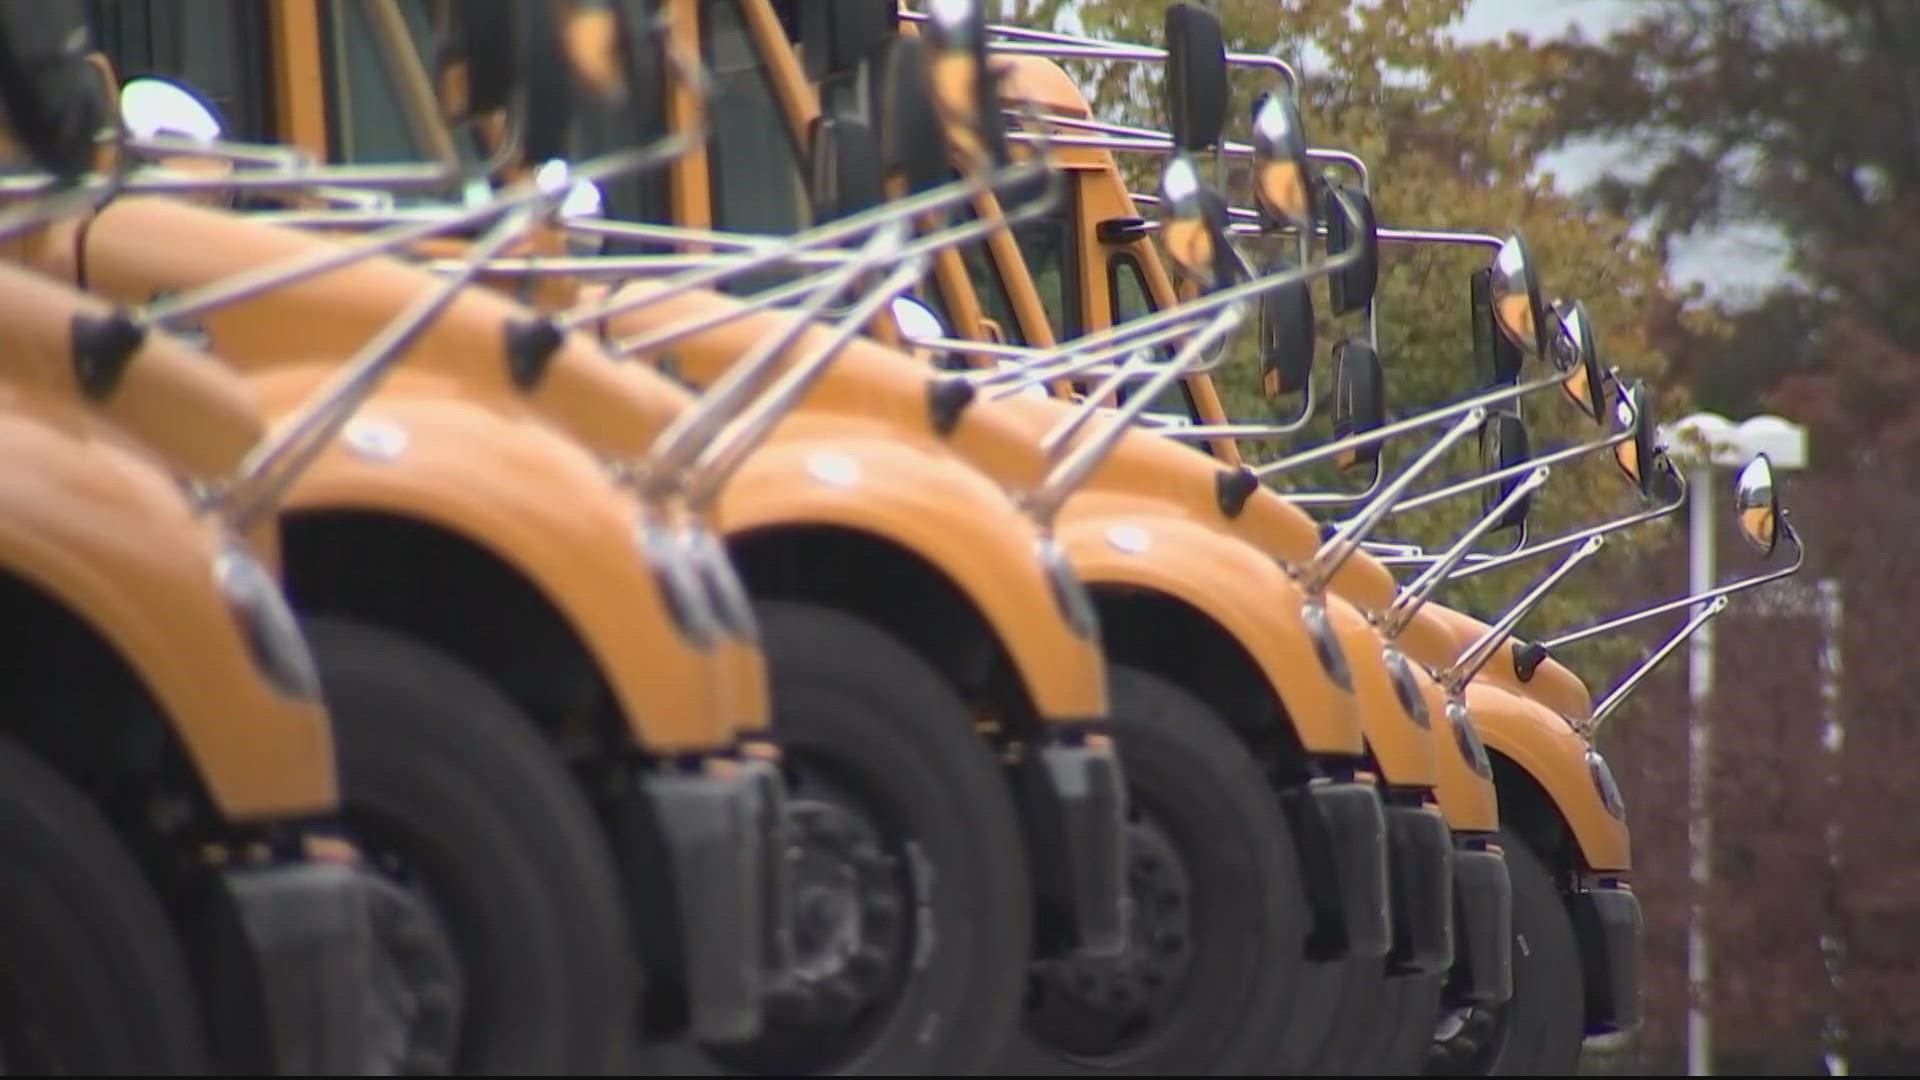 MCPS has the largest fleet of Electric school buses in the nation. The school district is committed to being a good steward of natural resources.